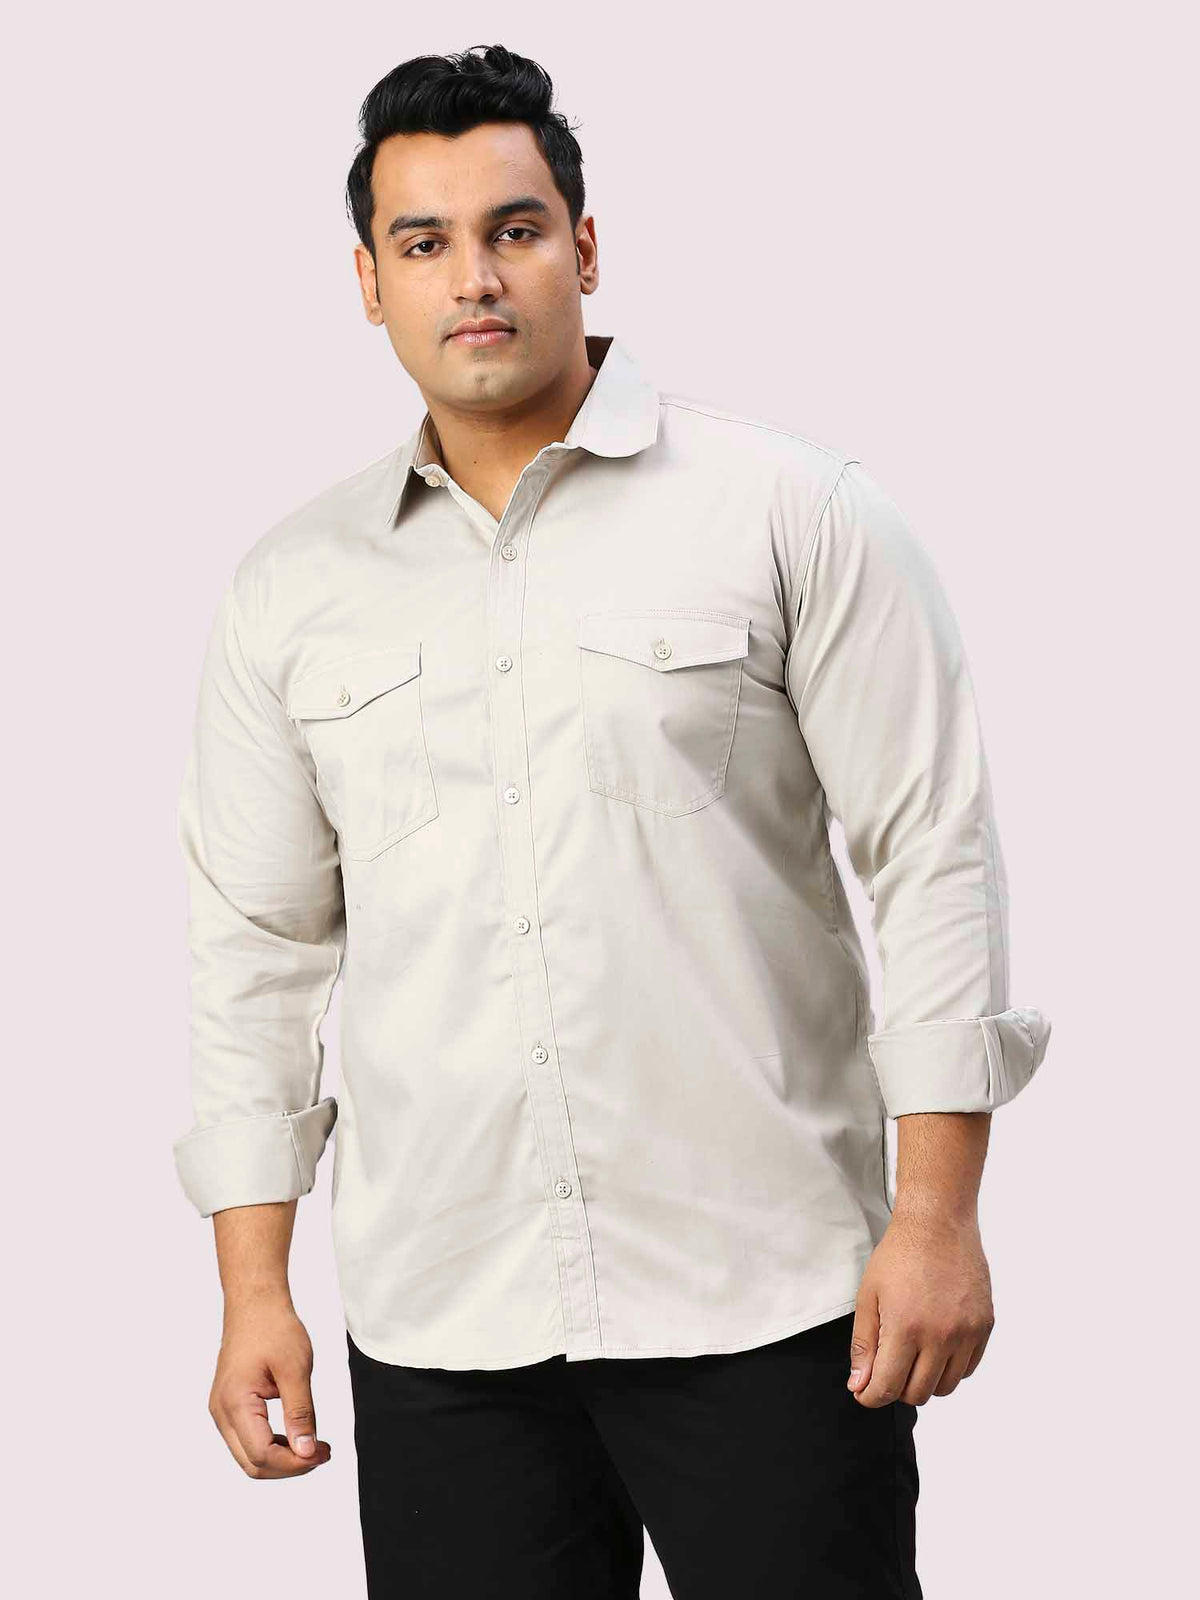 Harbor Grey Solid Pure Cotton Double Pocket Full Sleeve Shirt Men's Plus Size